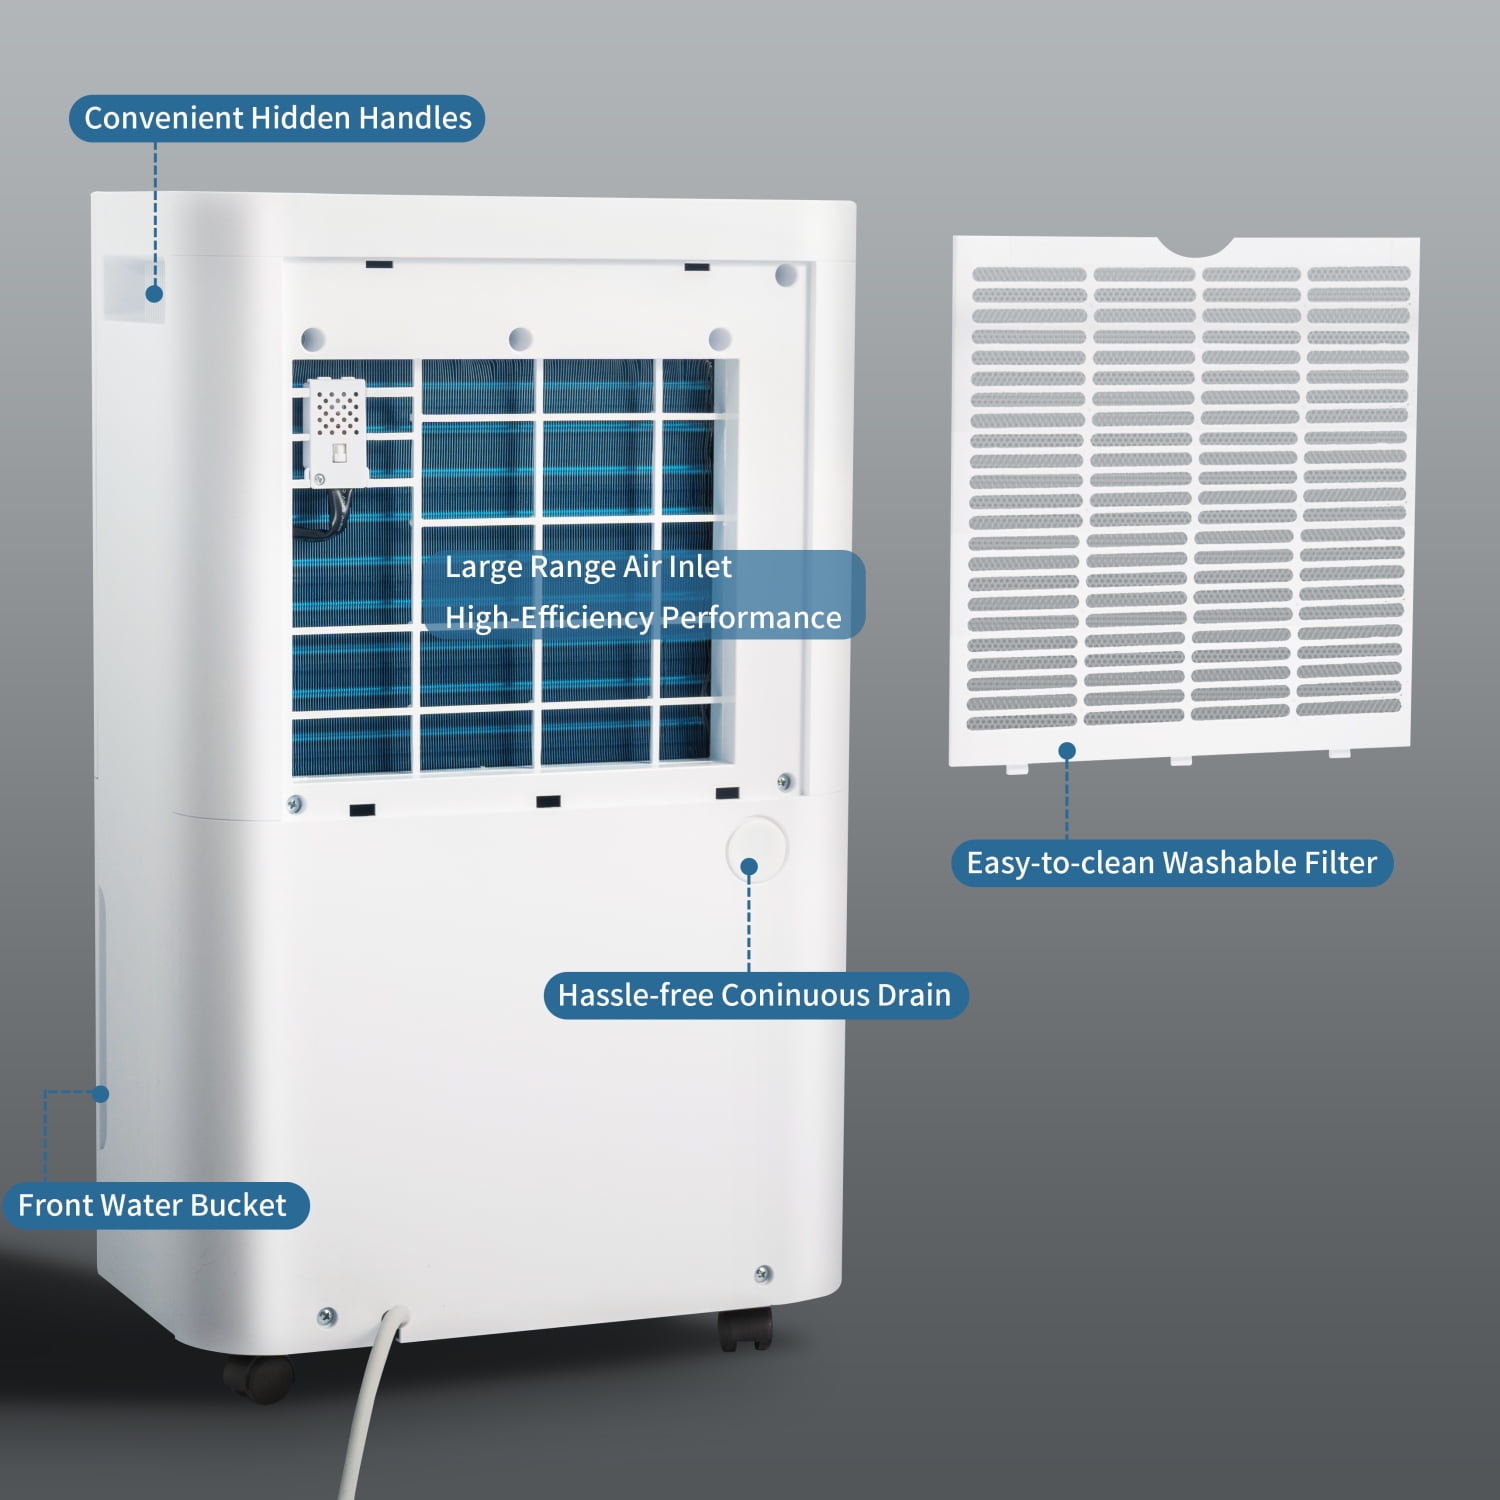 FREONIC Energy Star 16.9 pt. Up to 4500 sq.ft. Dehumidifier in